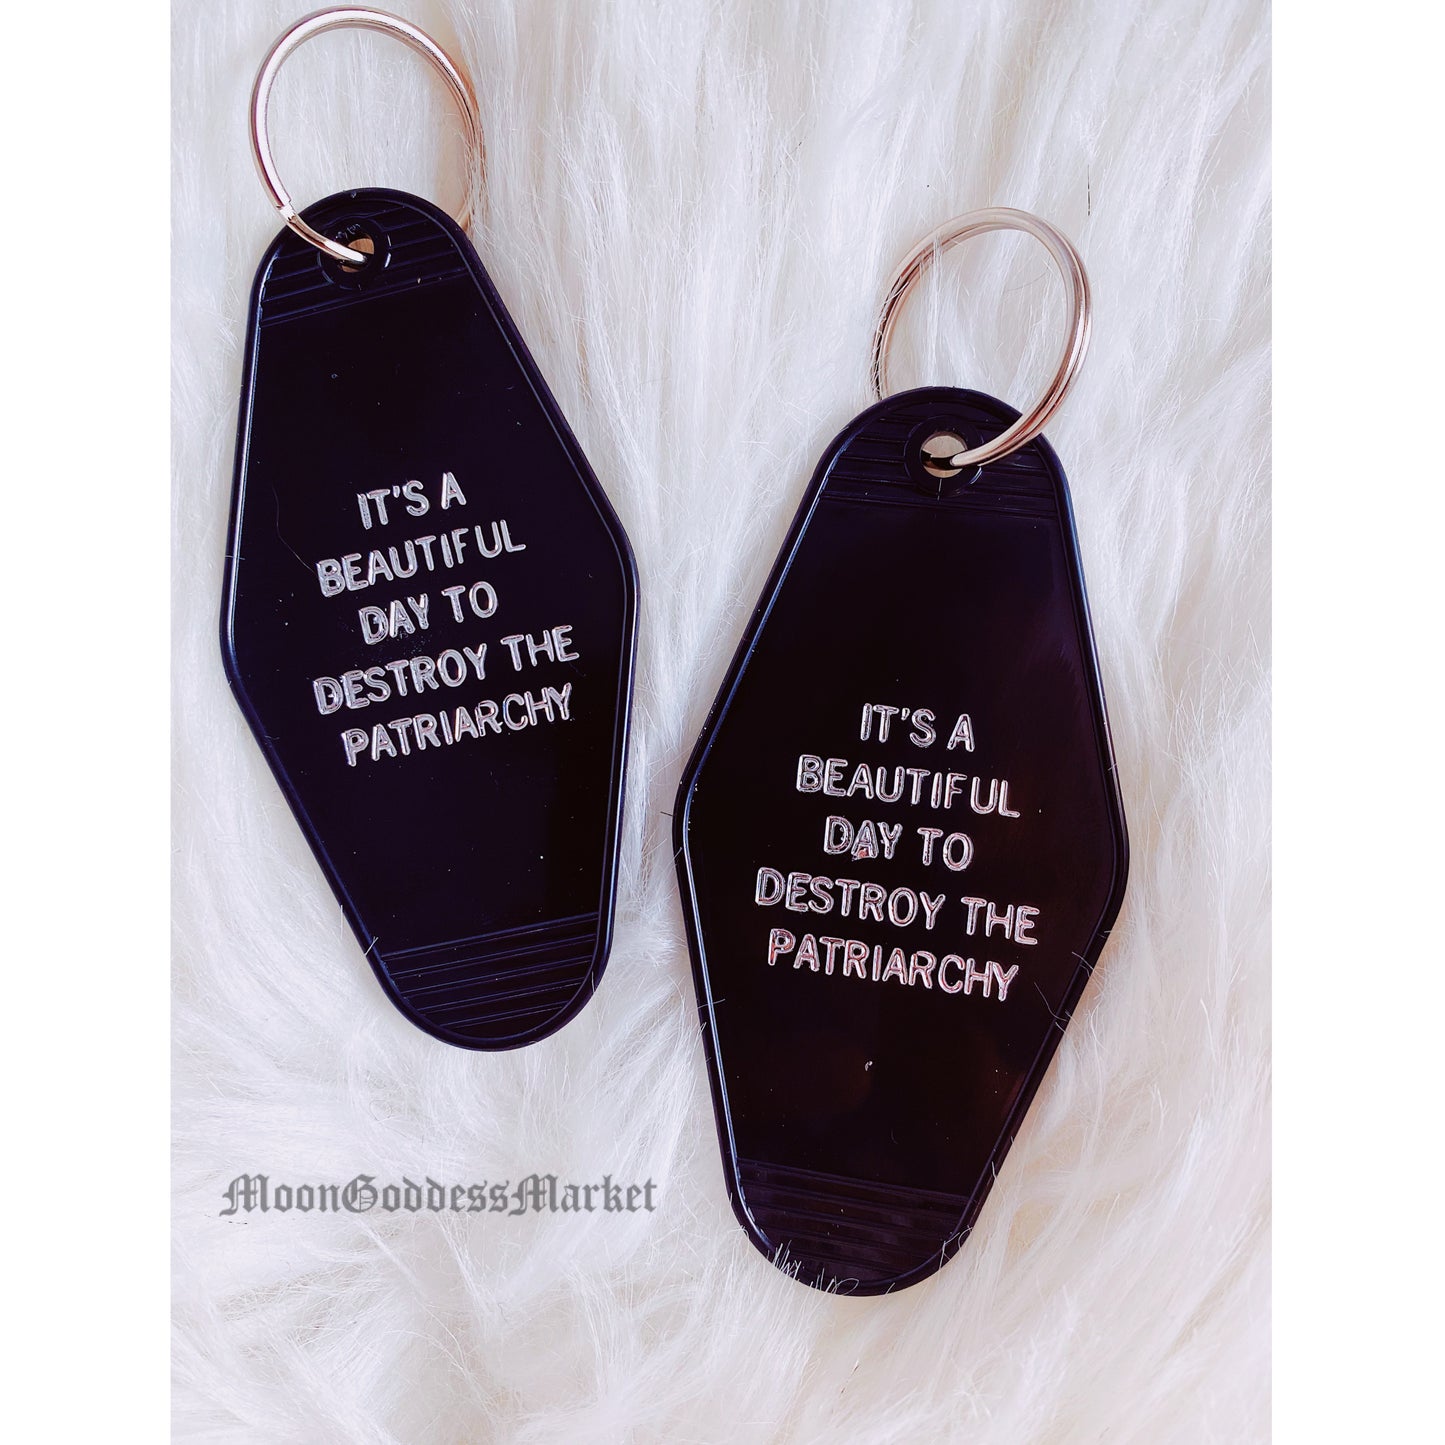 It’s A Beautiful Day To Destroy The Patriarchy Motel Keychain - Moon Goddess Market